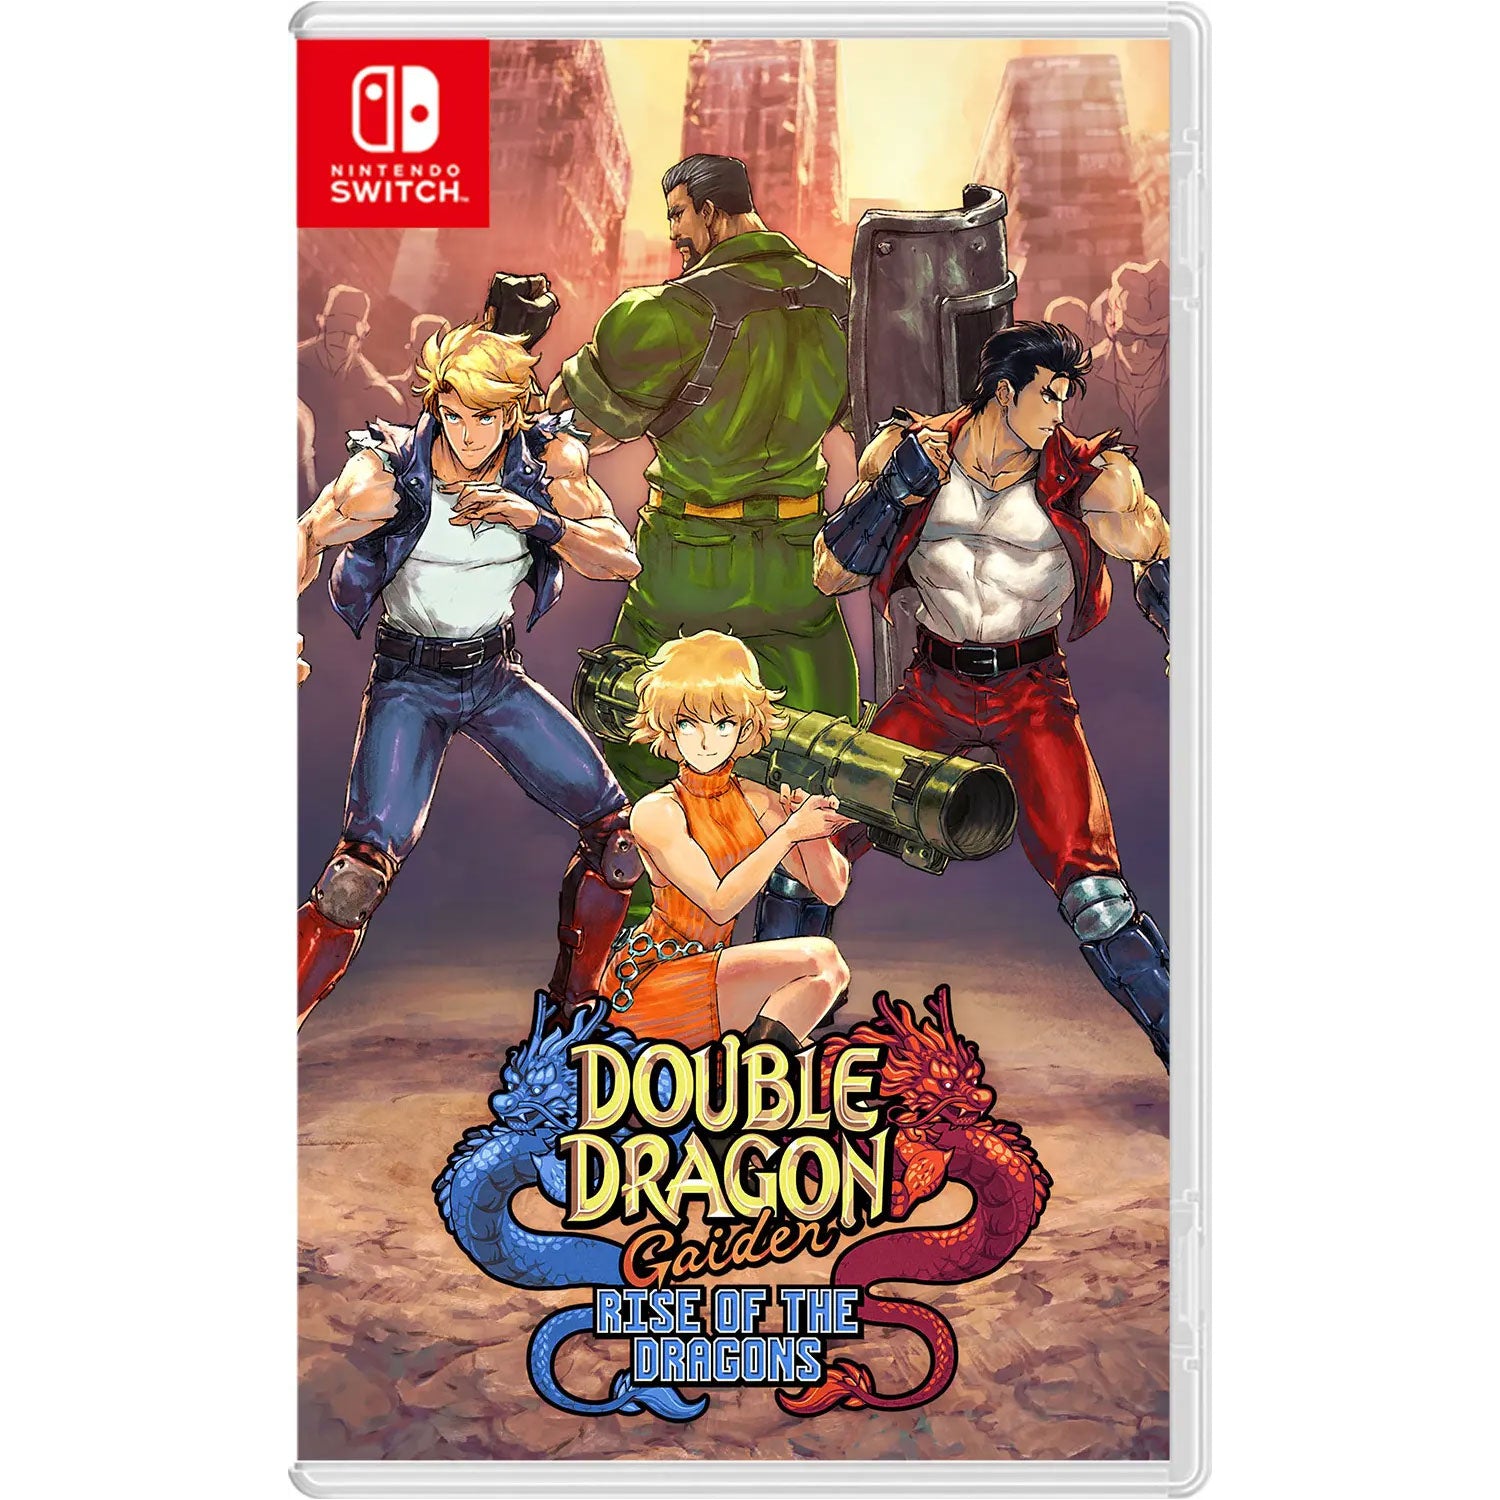 Double Dragon Gaiden: Rise of the Dragons Announced for PC and Consoles